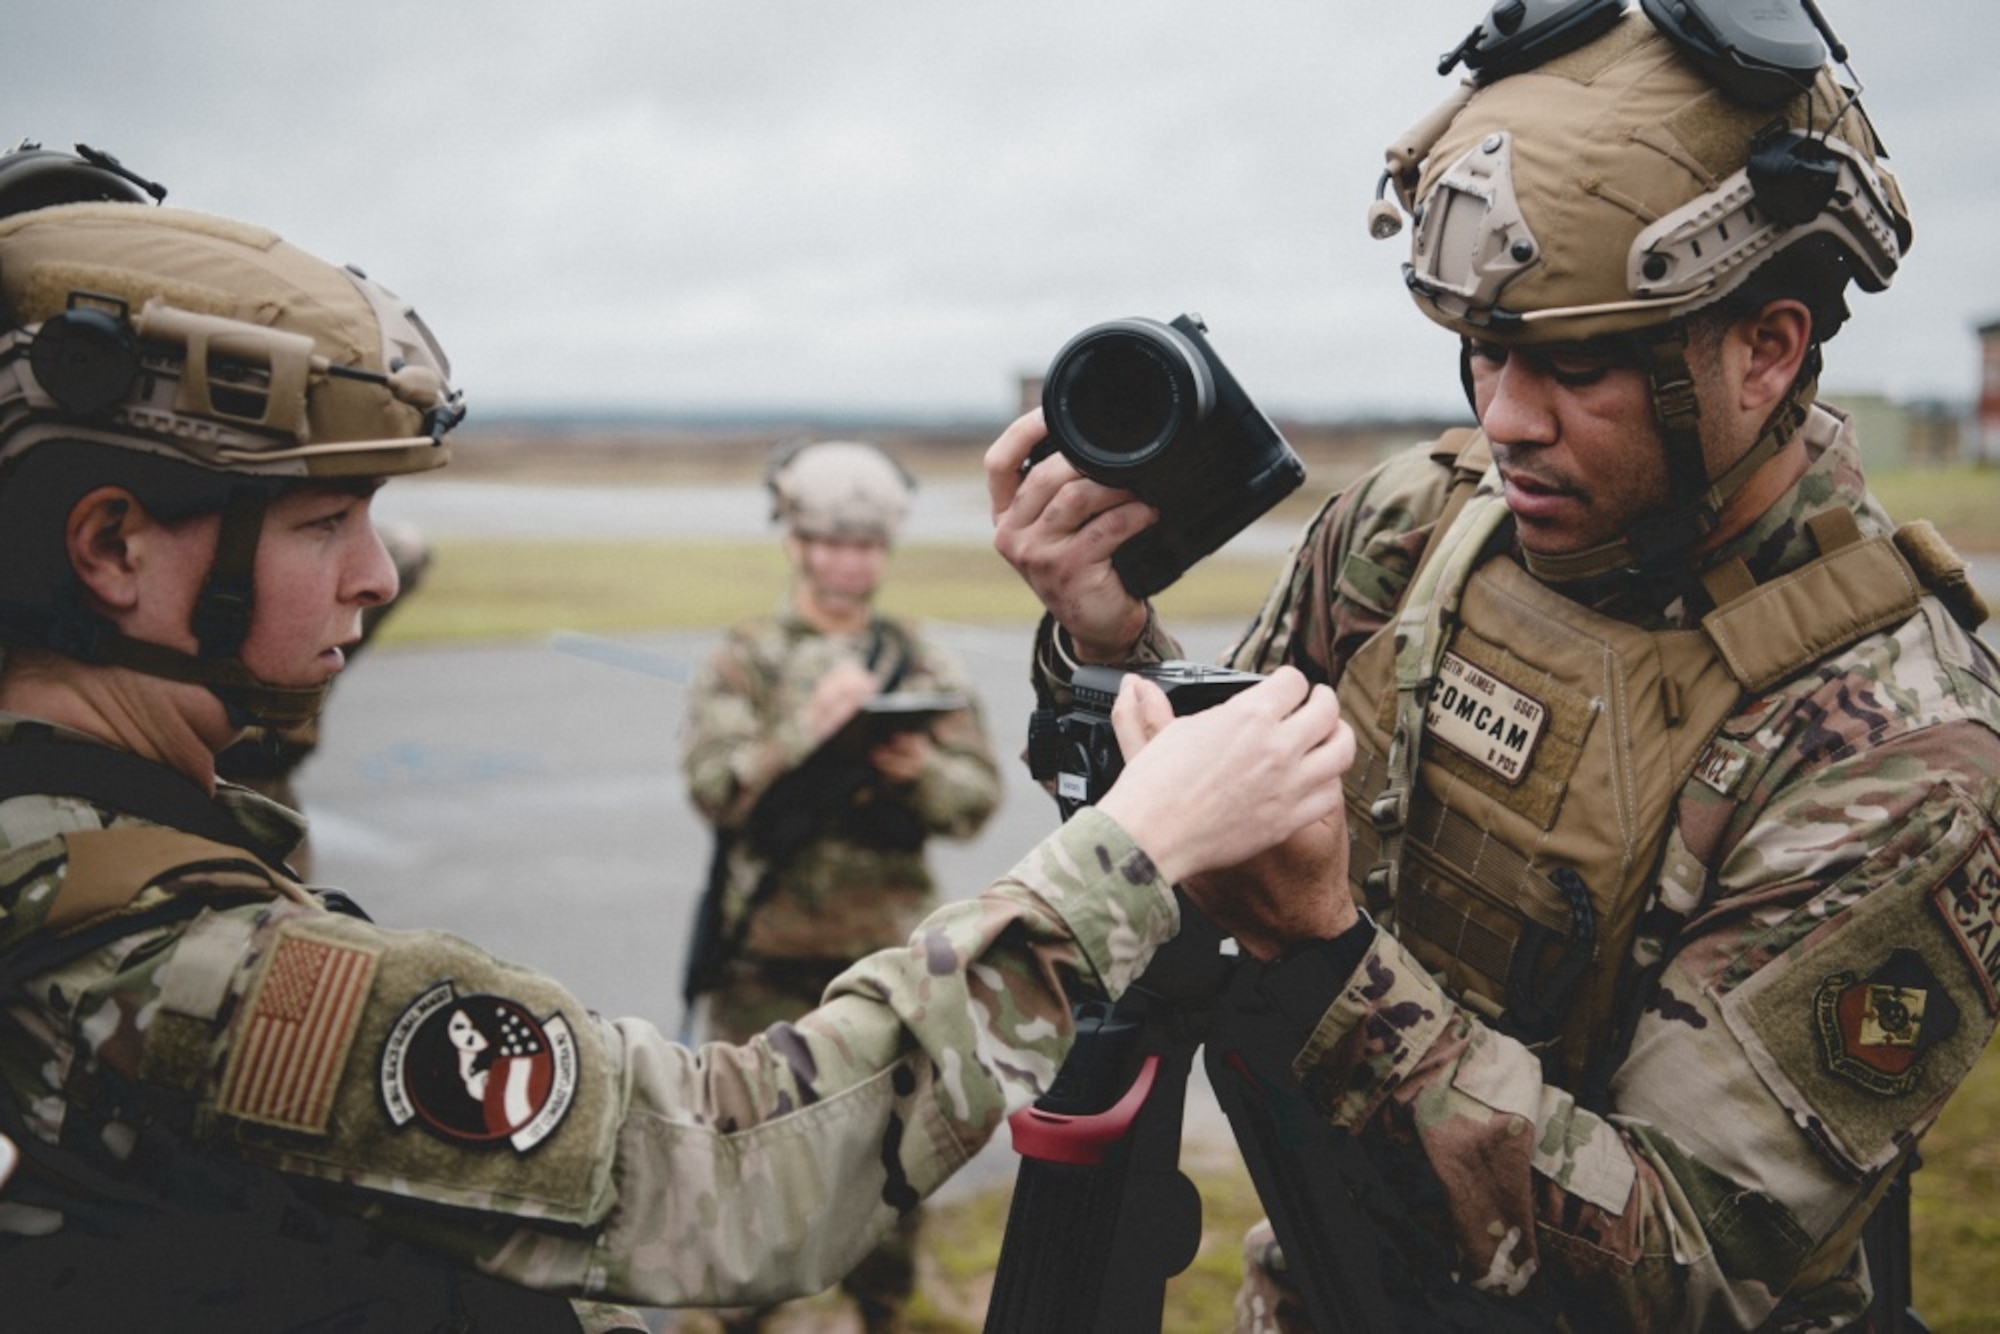 Image of two Airmen during an exercise